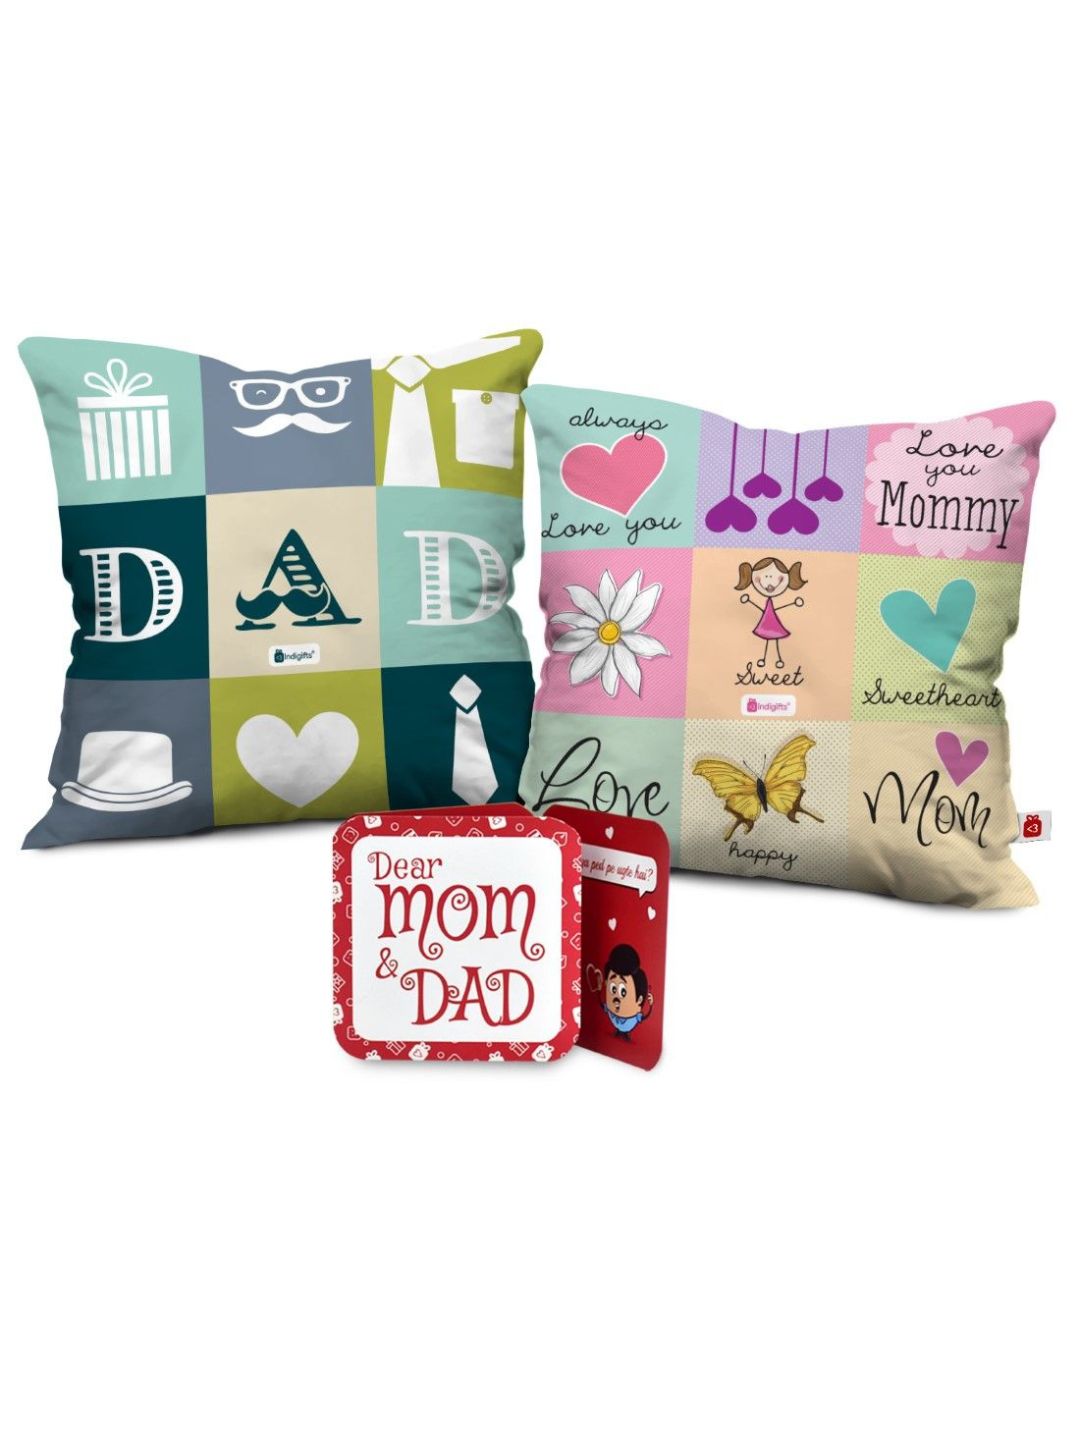 Indigifts Love You Dad Love You Mom Printed Cushions with Filler| 12×12 inches| Multicolour| Set of 2| Polycotton|Home Decor| Mom Dad Gift | Gift for Parents | Mummy Birthday Gift